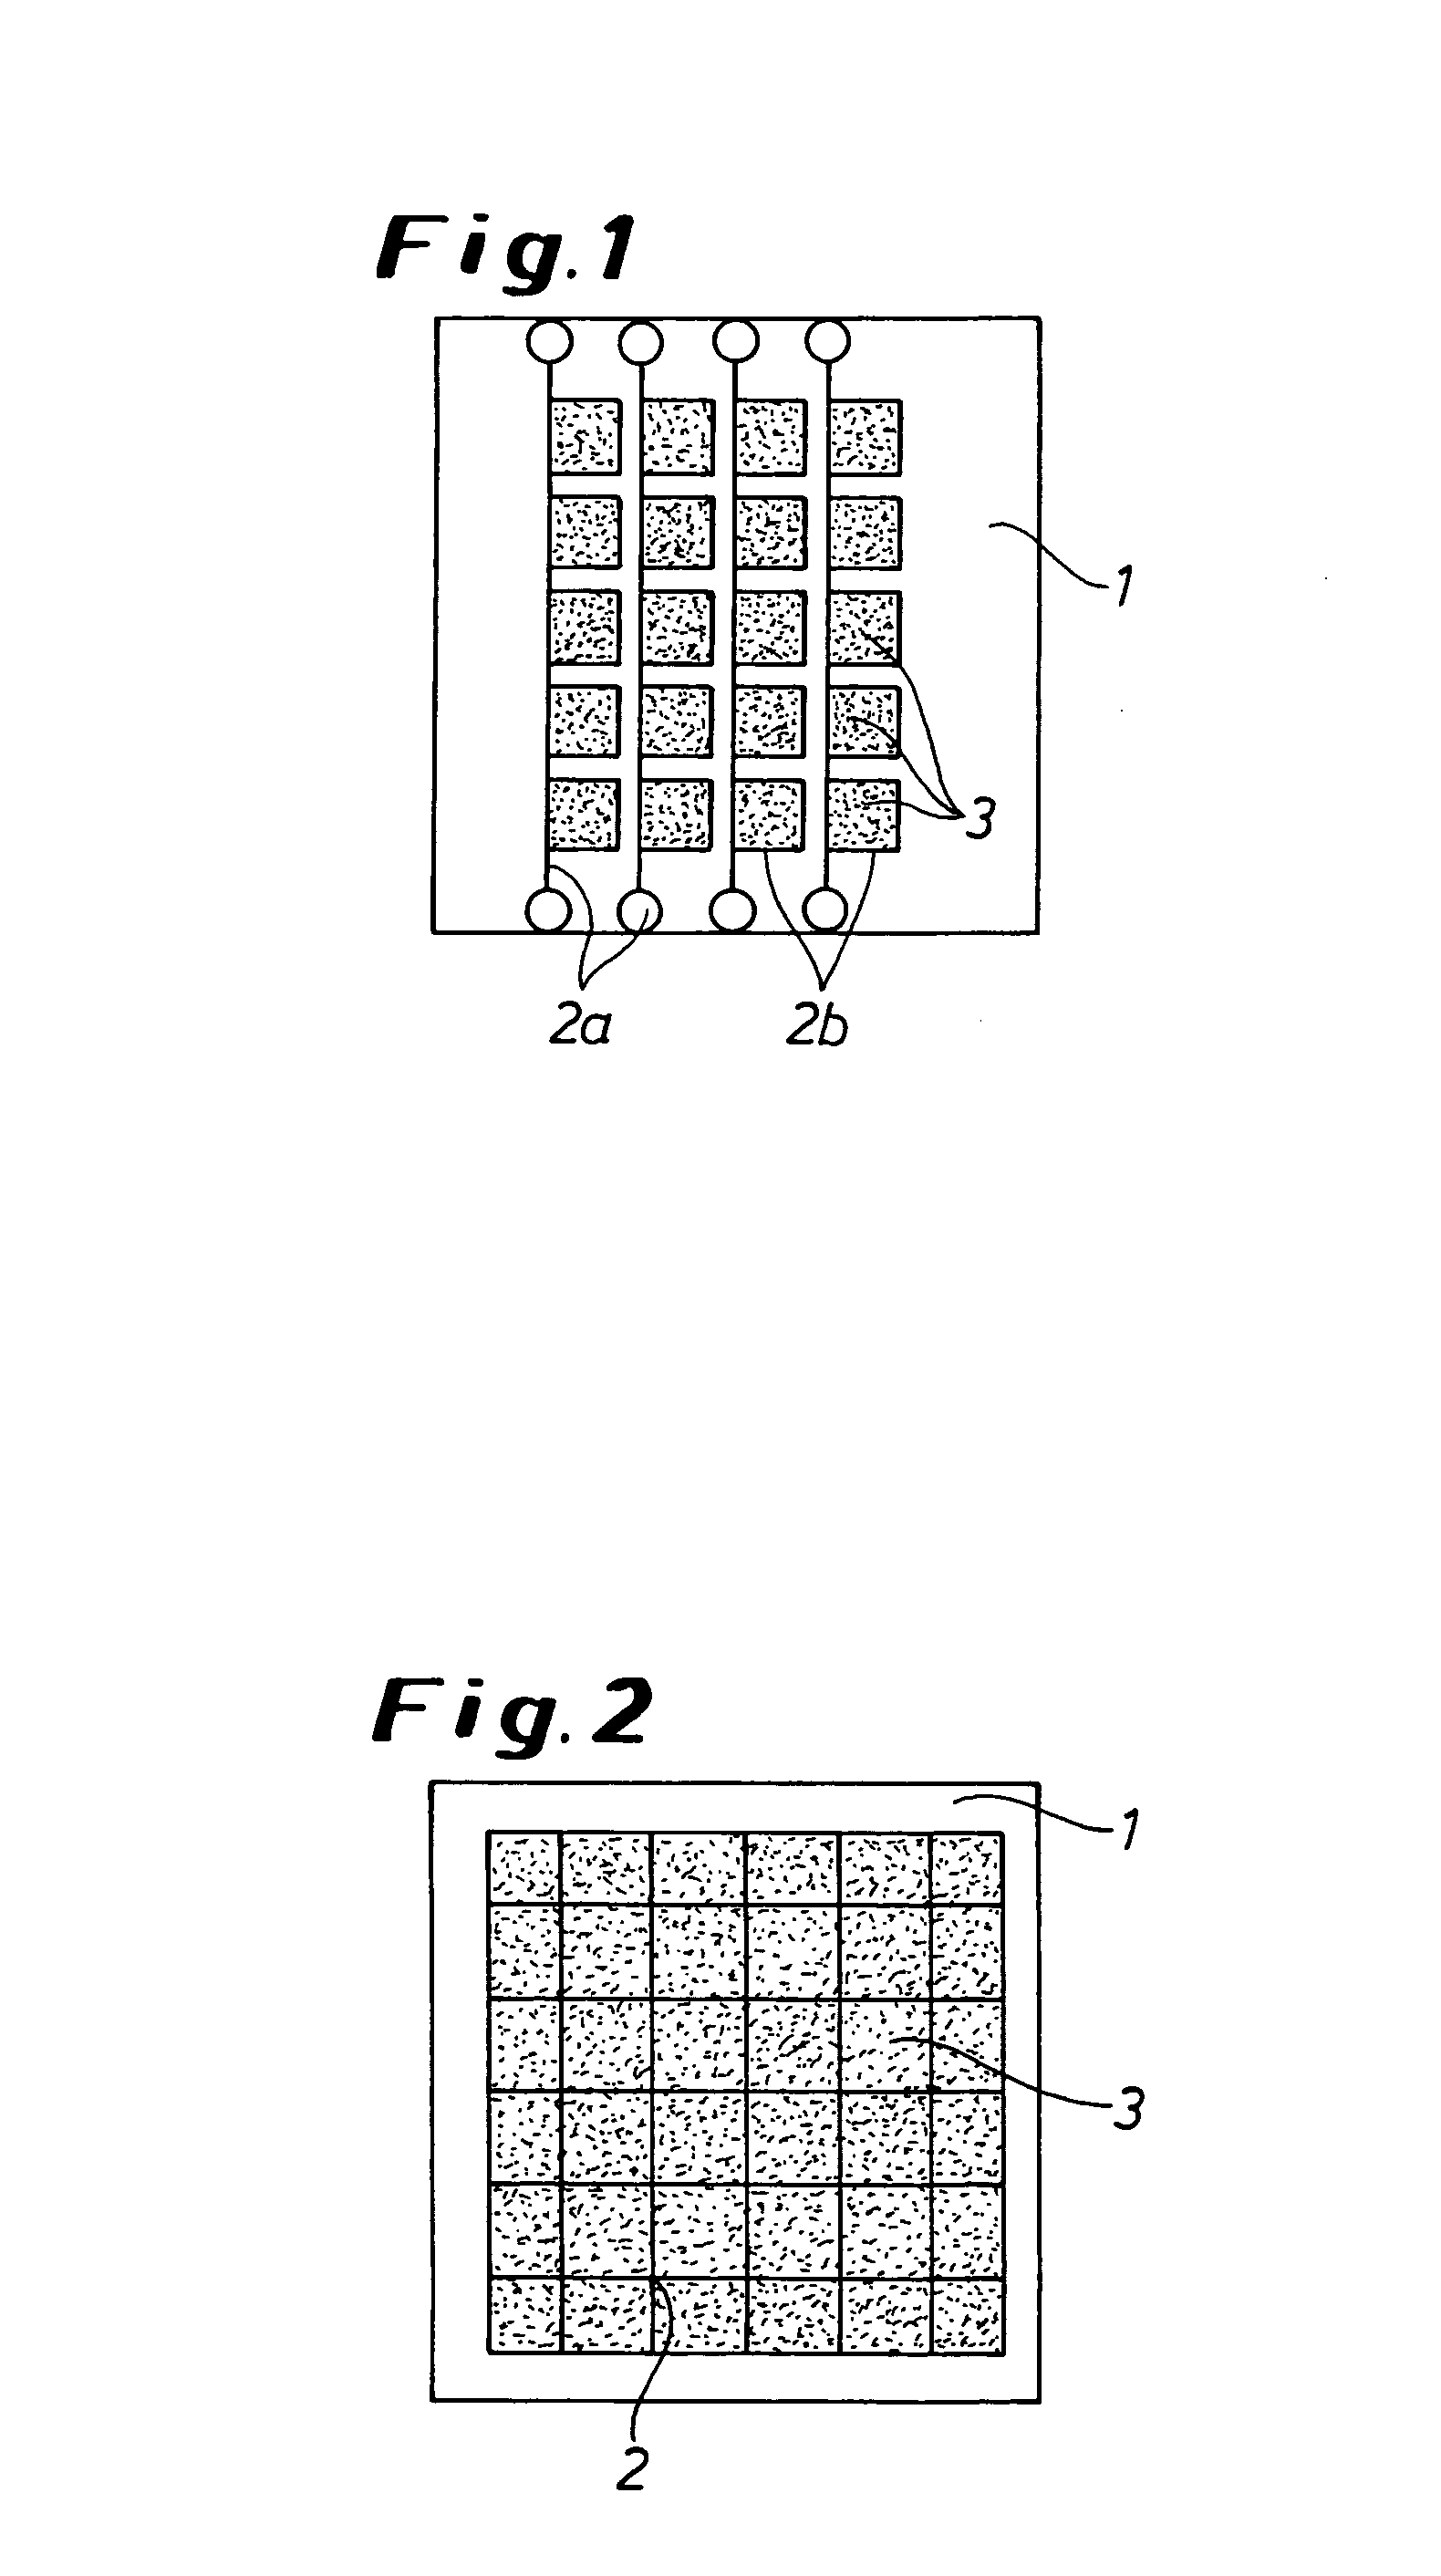 Transparent polymeric electrodes for electro-optical structures, processes for producing the same, and dispersions used in such processes